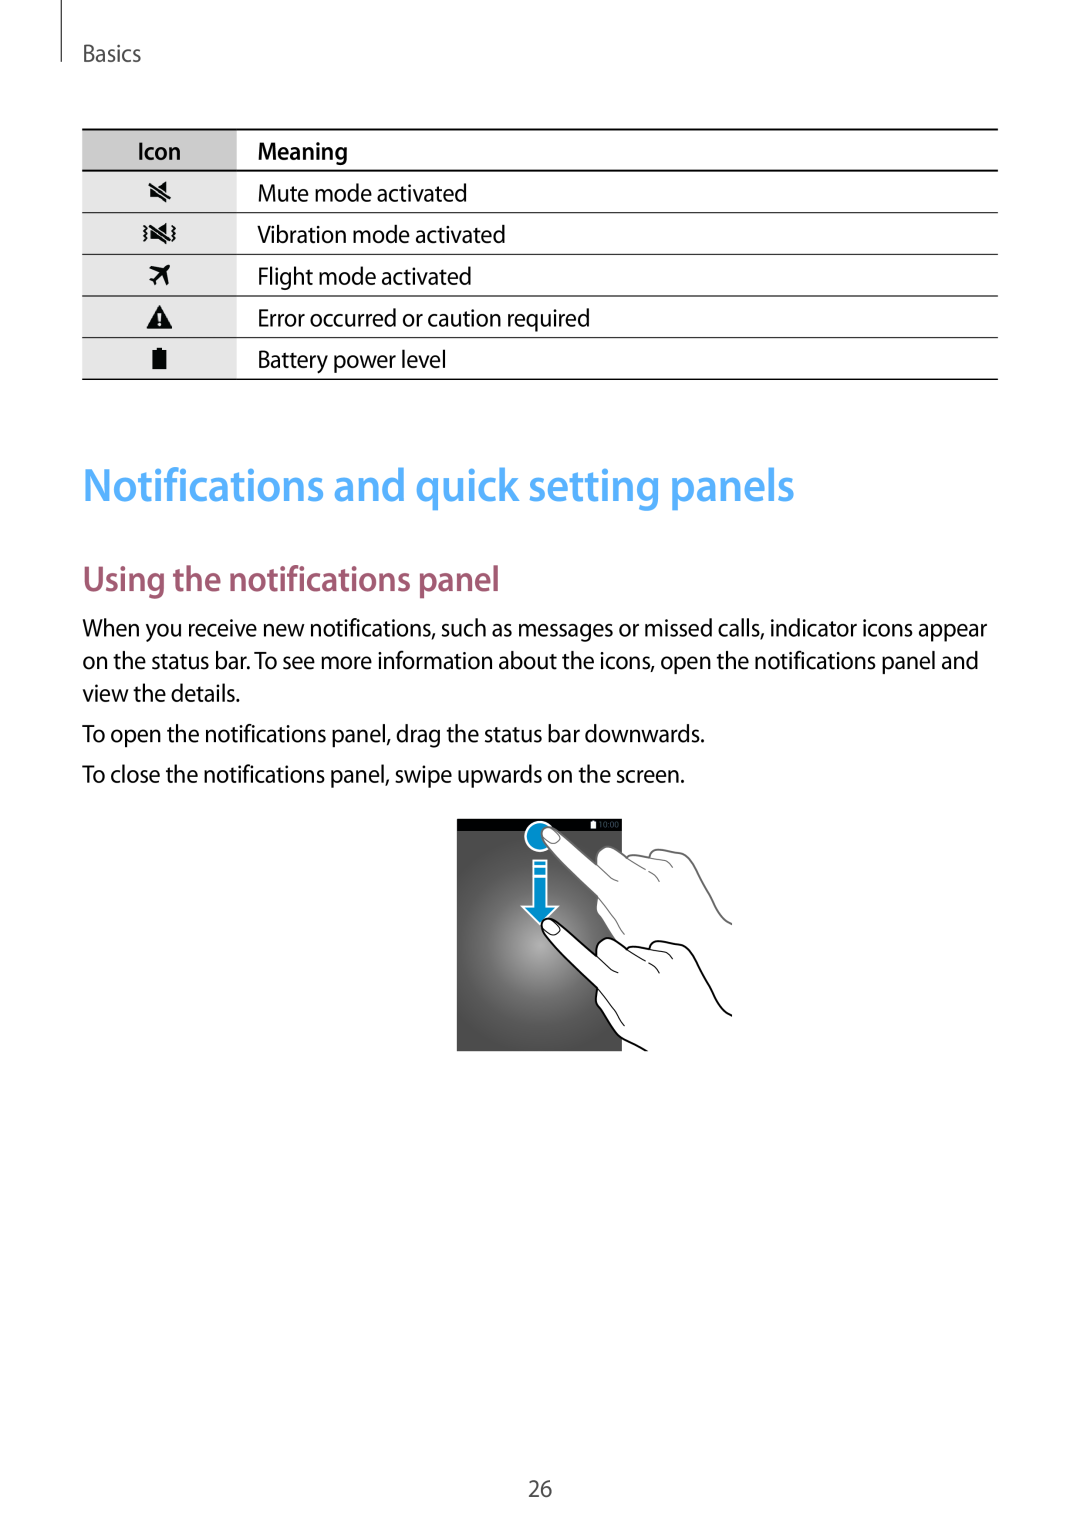 Samsung SM-G901FZKAEUR manual Notifications and quick setting panels, Using the notifications panel, Basics, Icon Meaning 